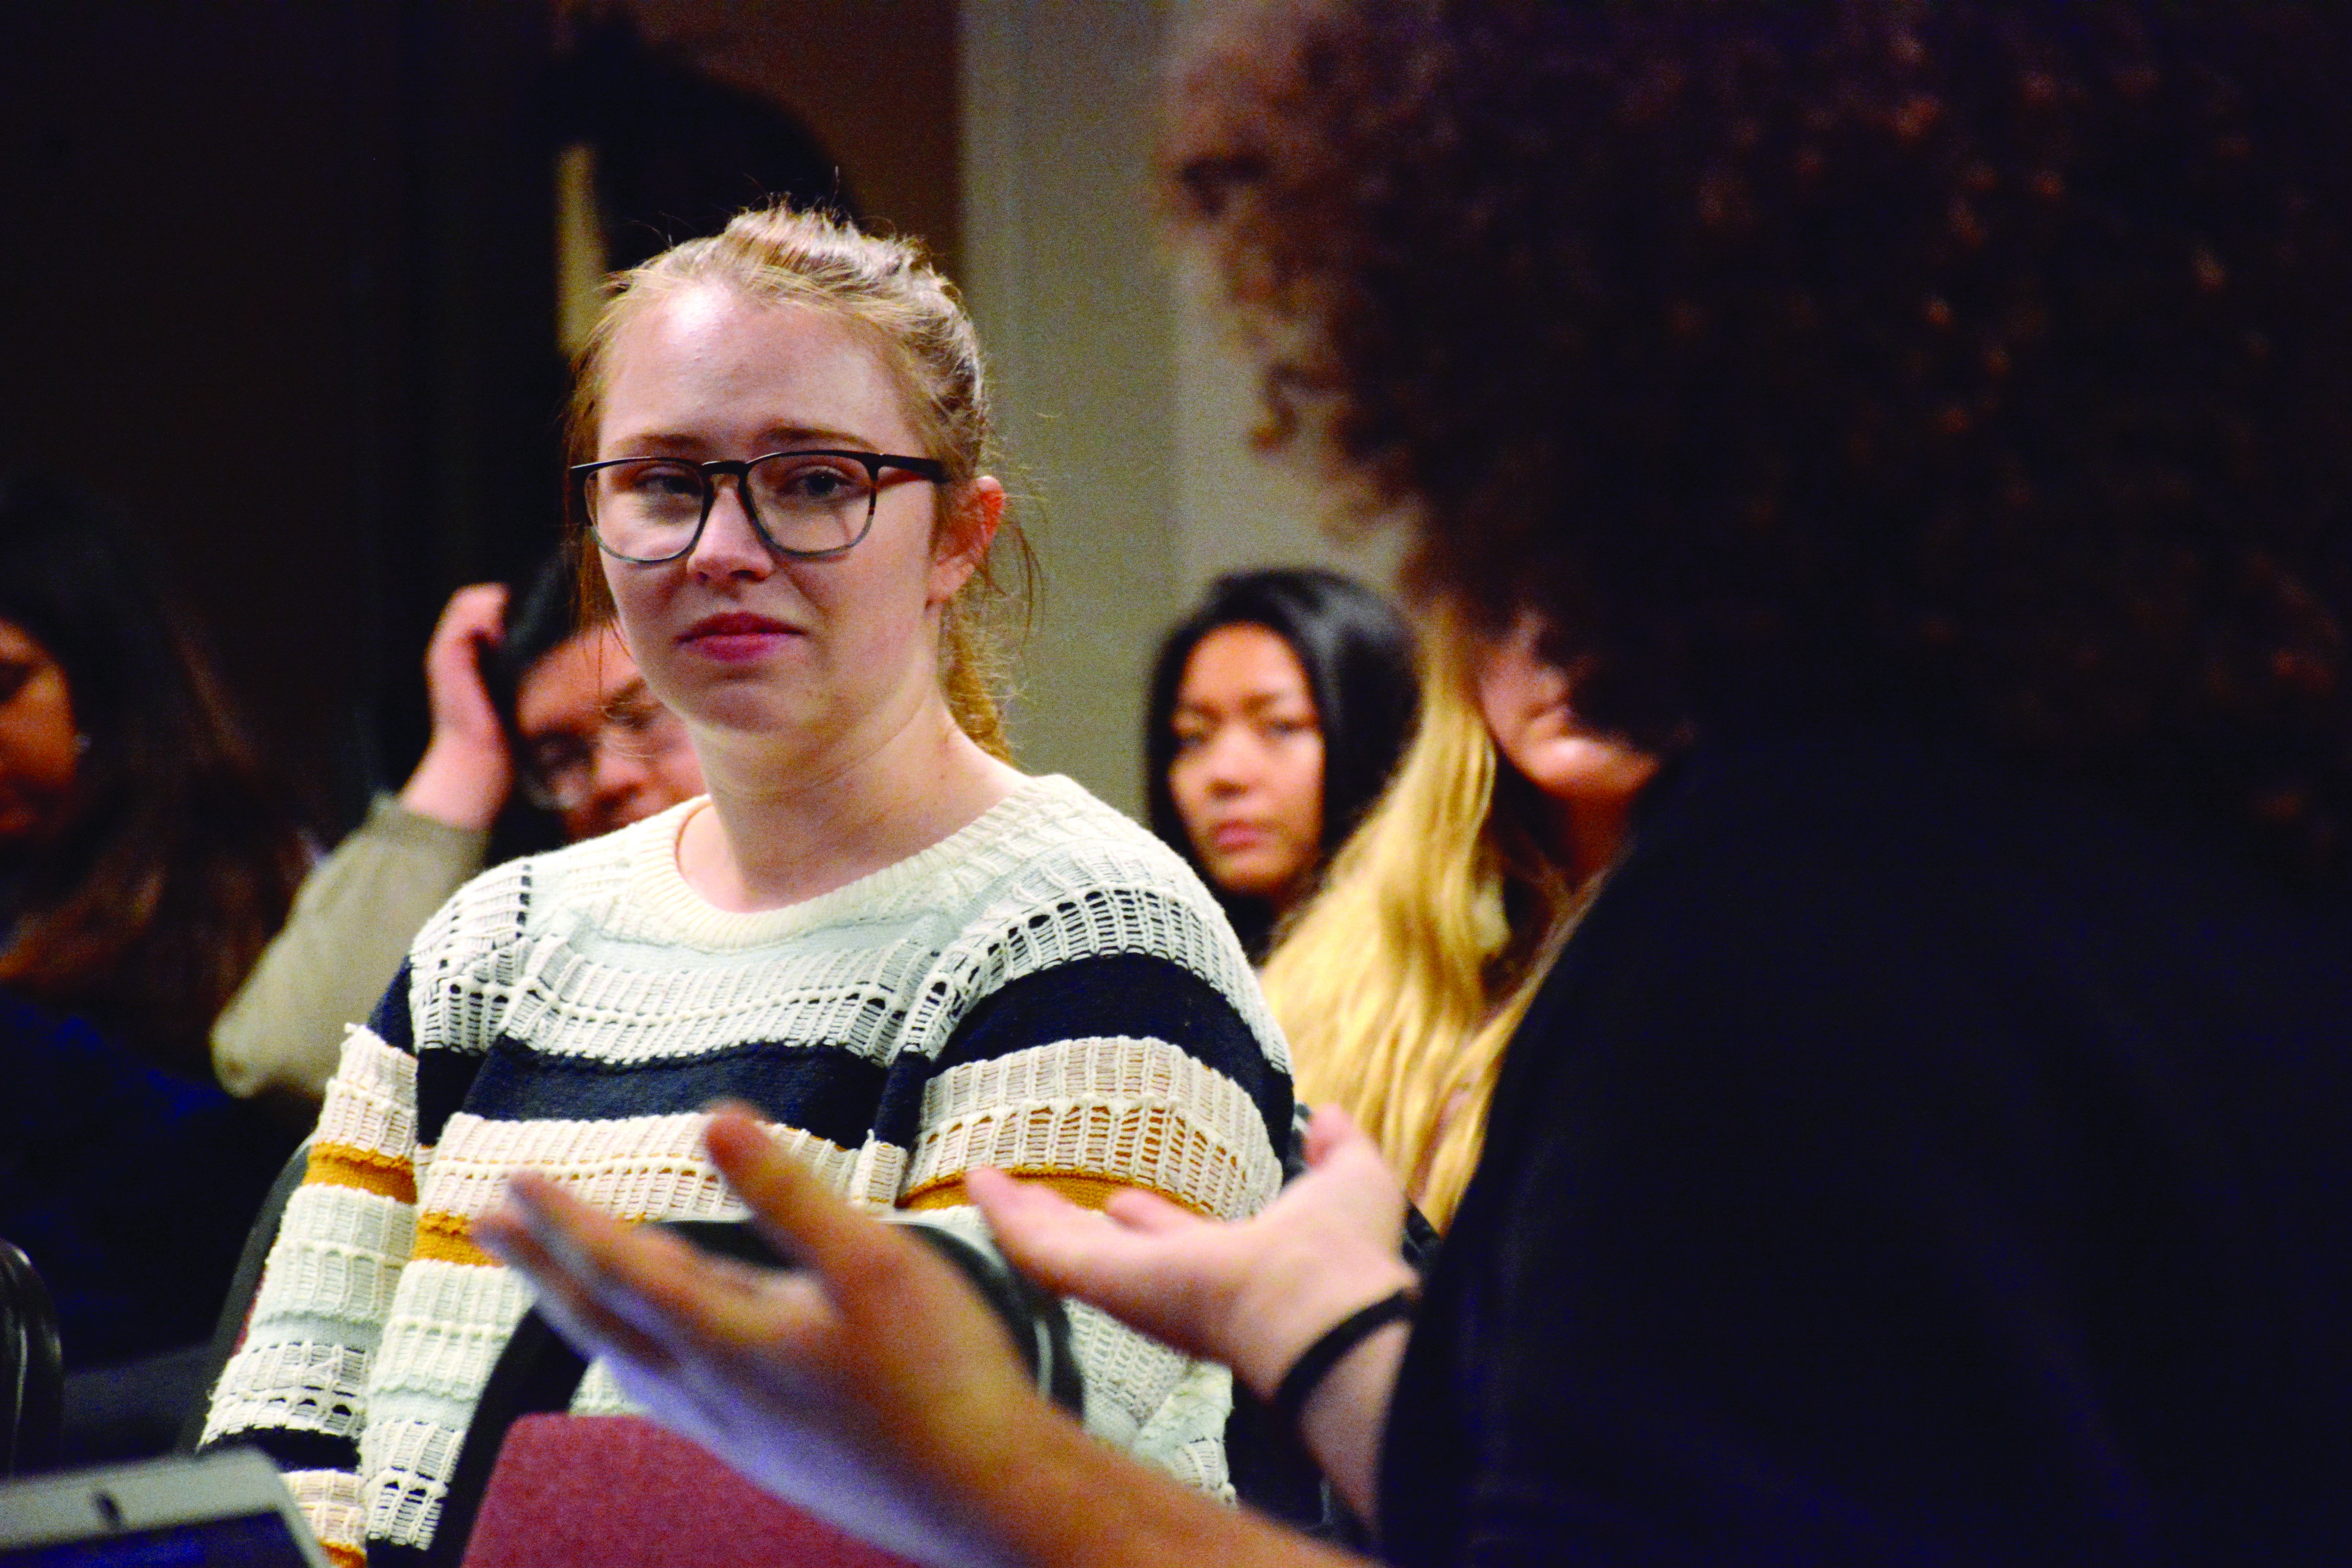 The RHA held a Town Hall event on Tuesday, Feb. 26 to discuss safety on campus, as well issues with the SF State alert system following a shooting in near by Park Merced. (Tristen Rowean/Golden Gate Xpress)